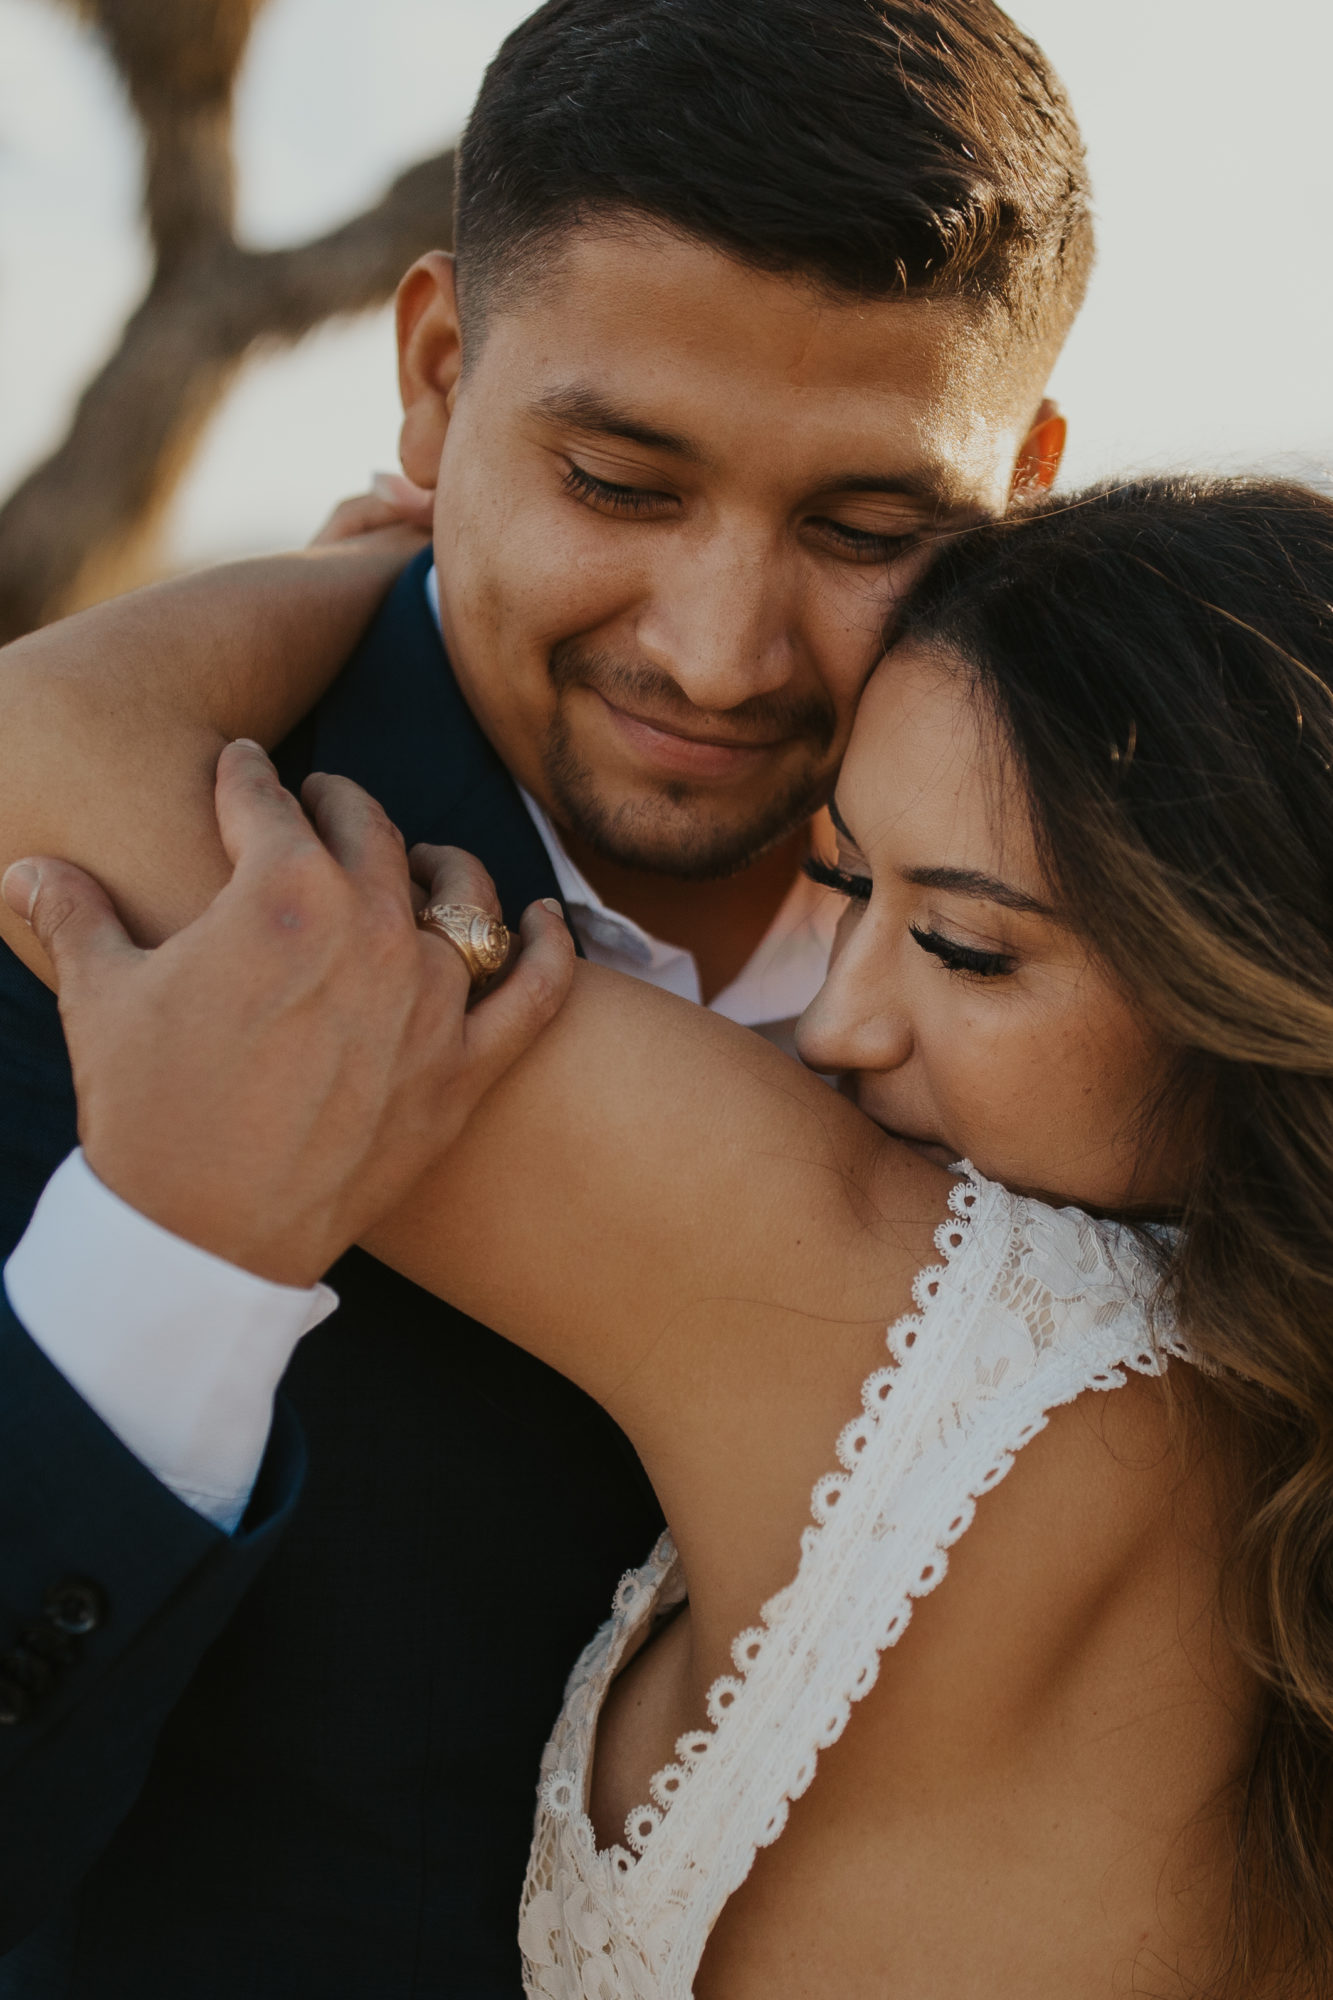 Bride hugging groom during adventourous photo sesion